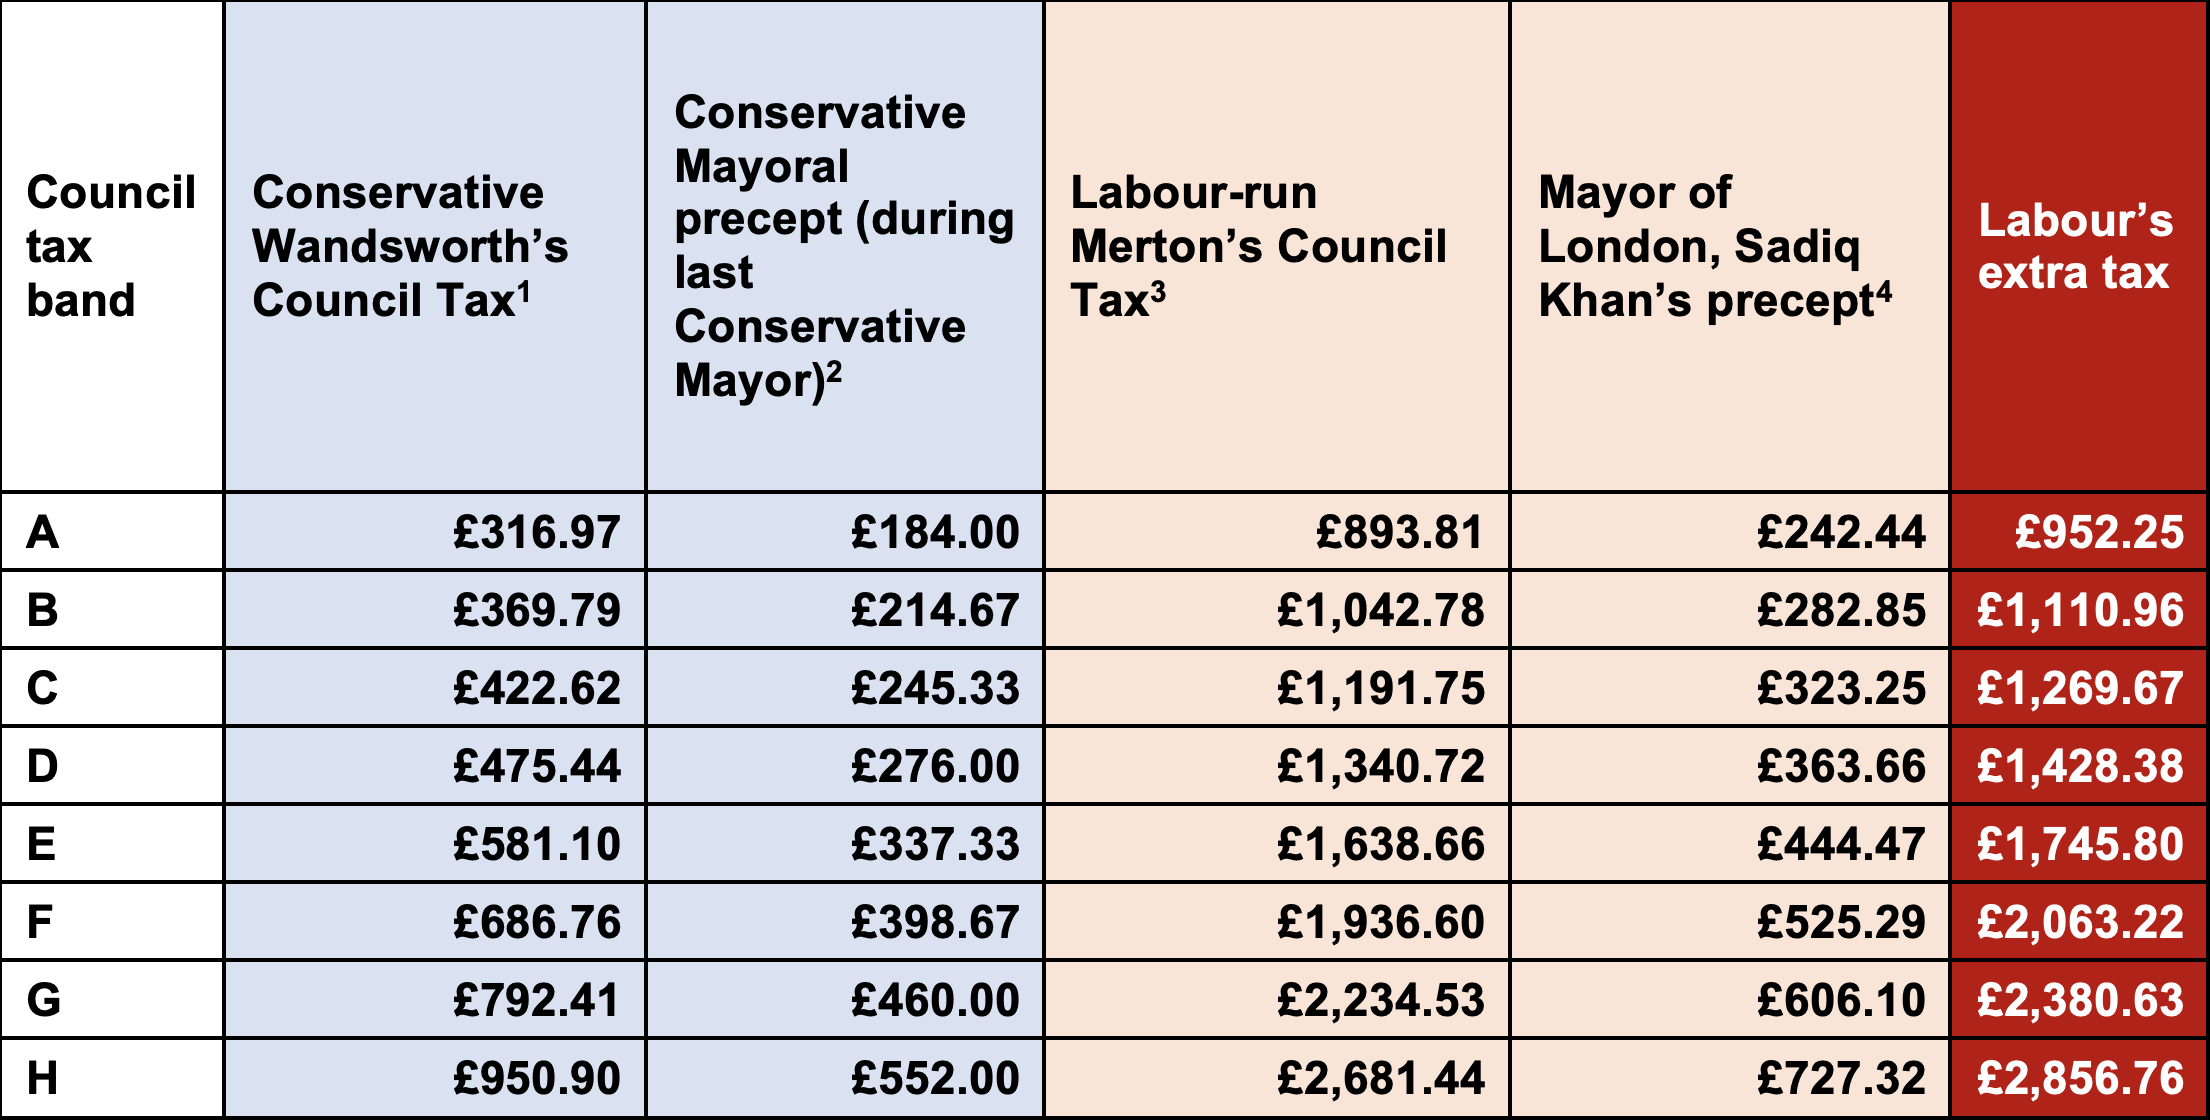 compare-the-council-wandsworth-conservatives